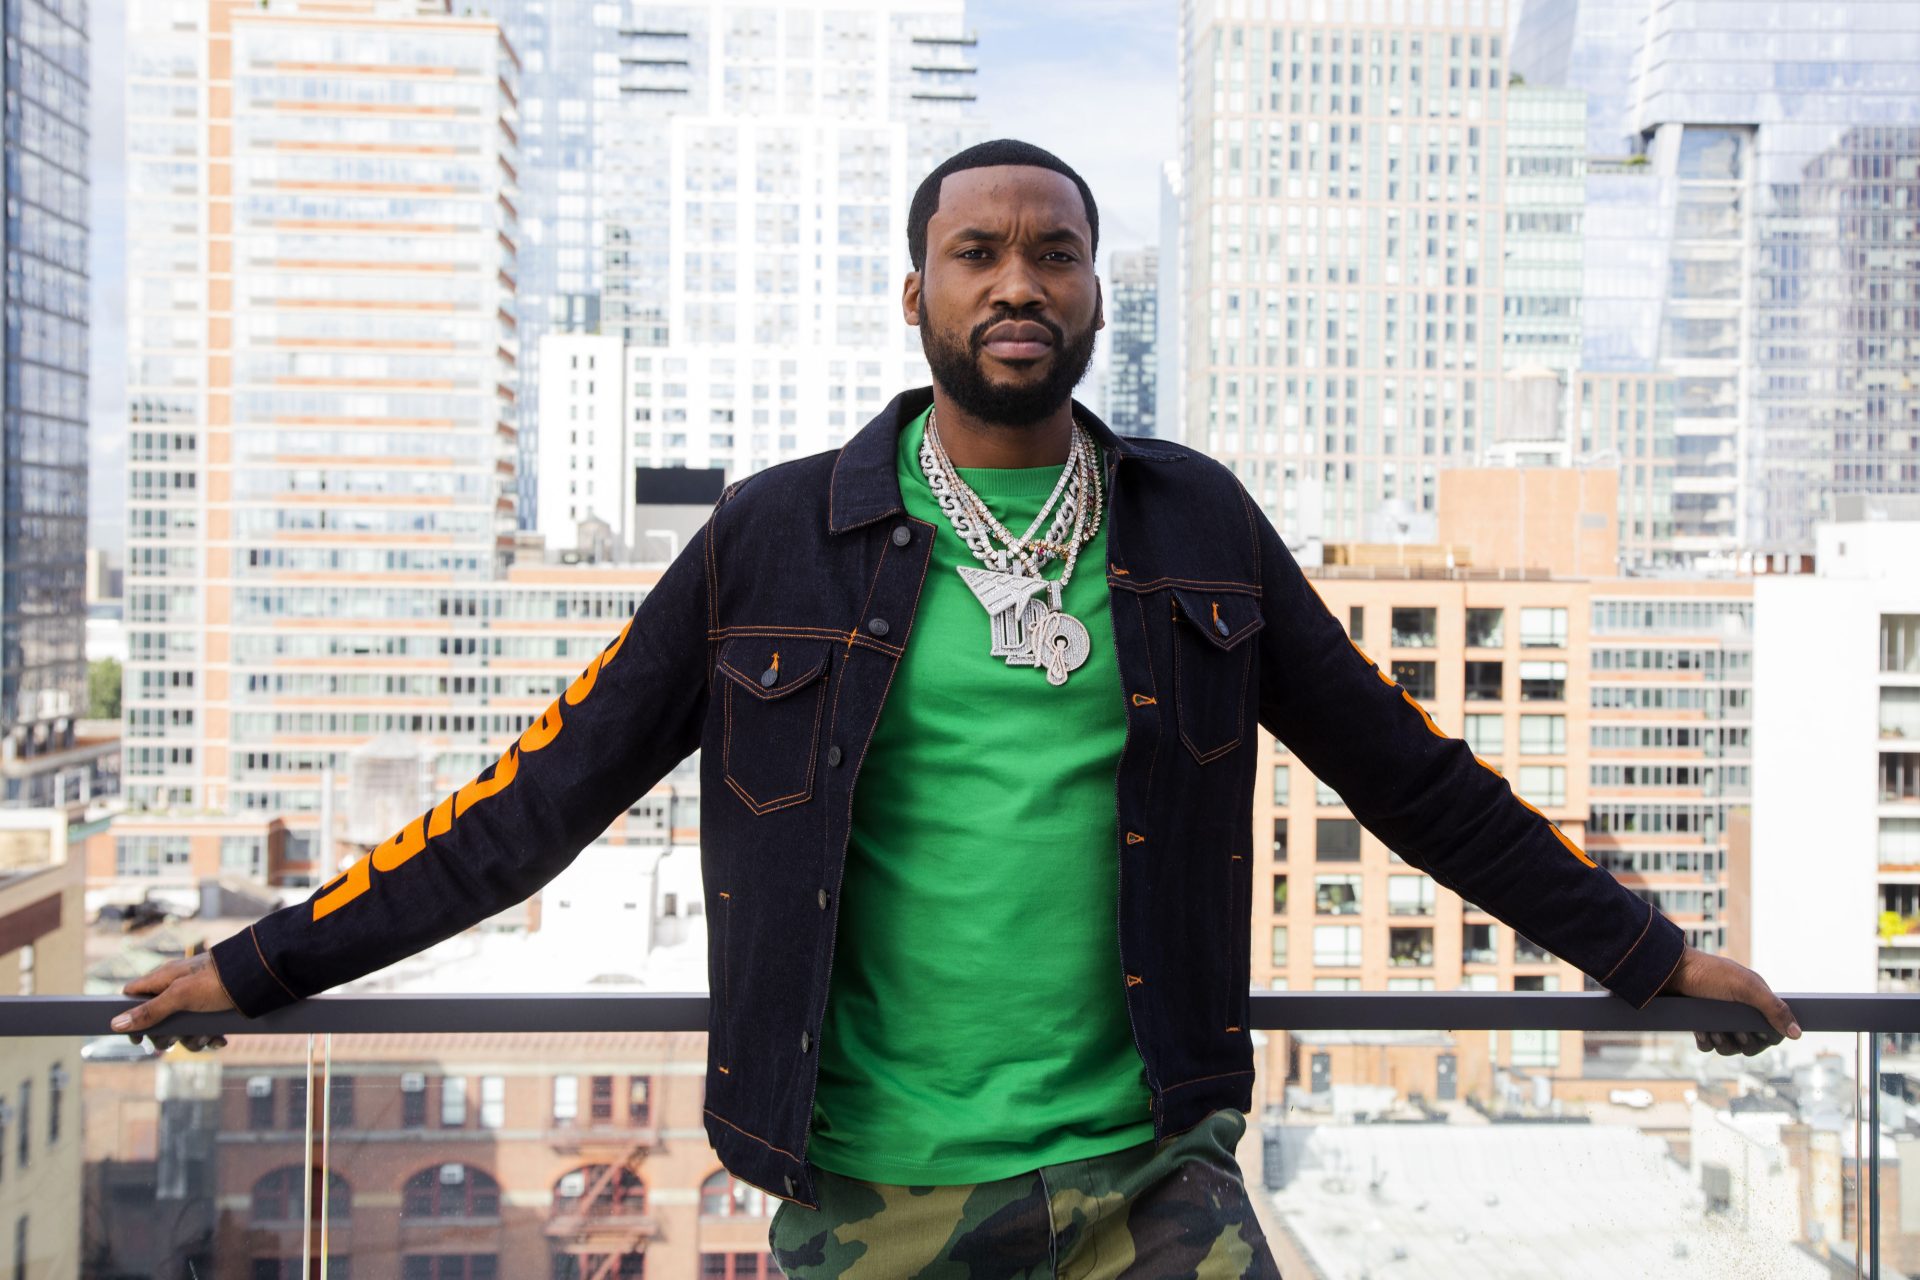 Meek Mill poses for a portrait at the Roc Nation offices in New York on Sept. 22, 2021, to promote his upcoming album “Expensive Pain.” The Philadelphia rapper is planning a concert on Oct. 23 at Madison Square Garden to celebrate the new album.